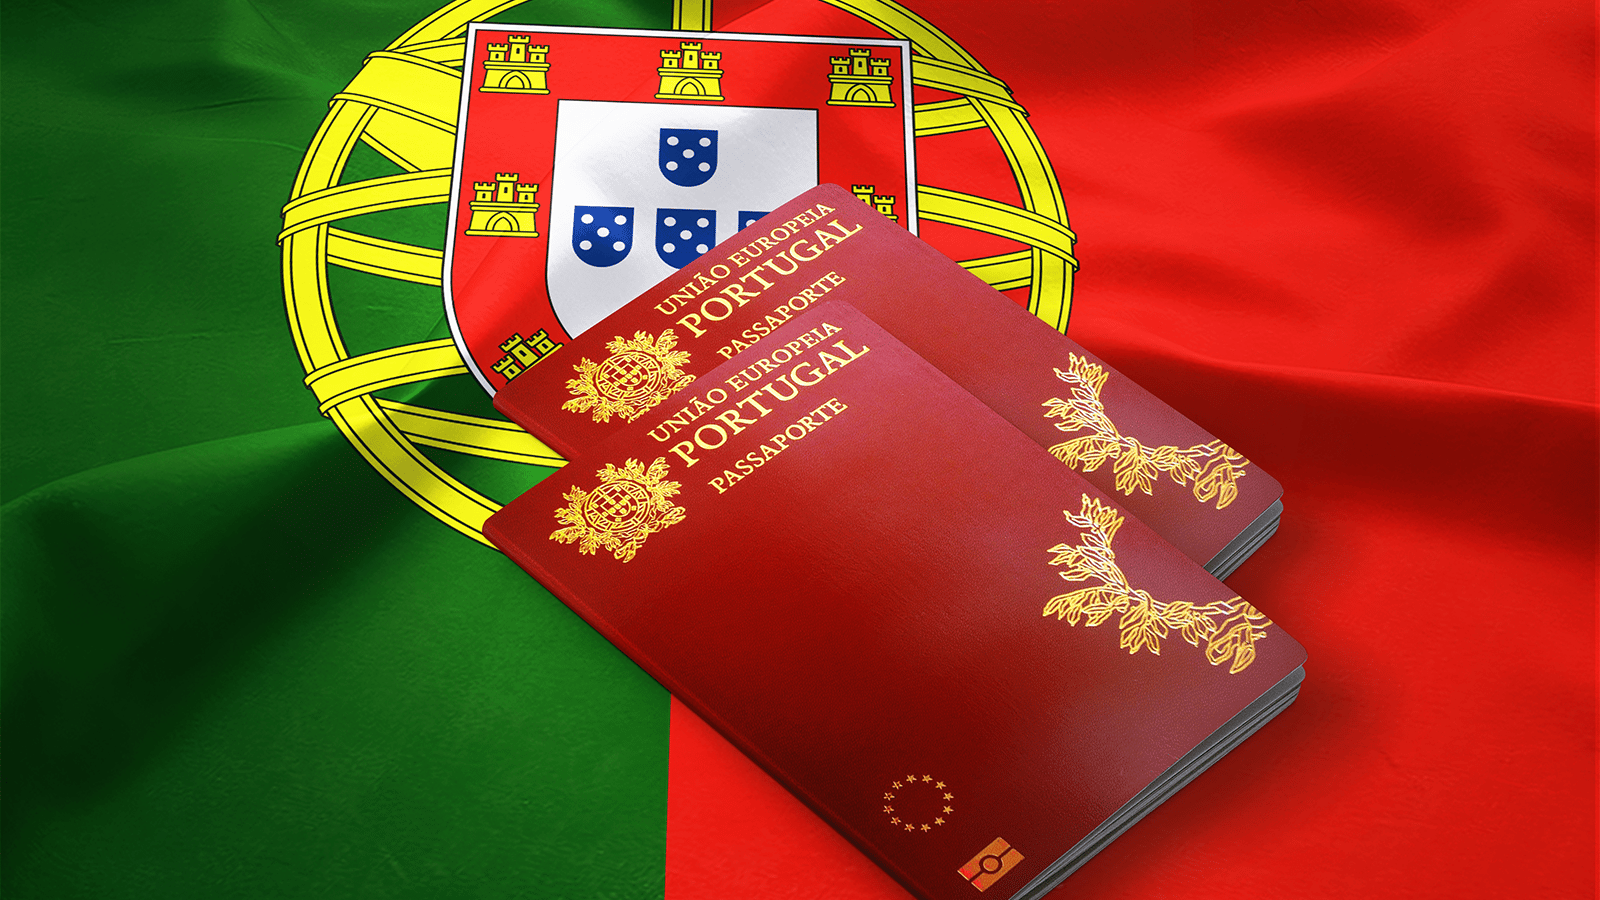 New Portugal Golden Visa Rules Come Into Effect